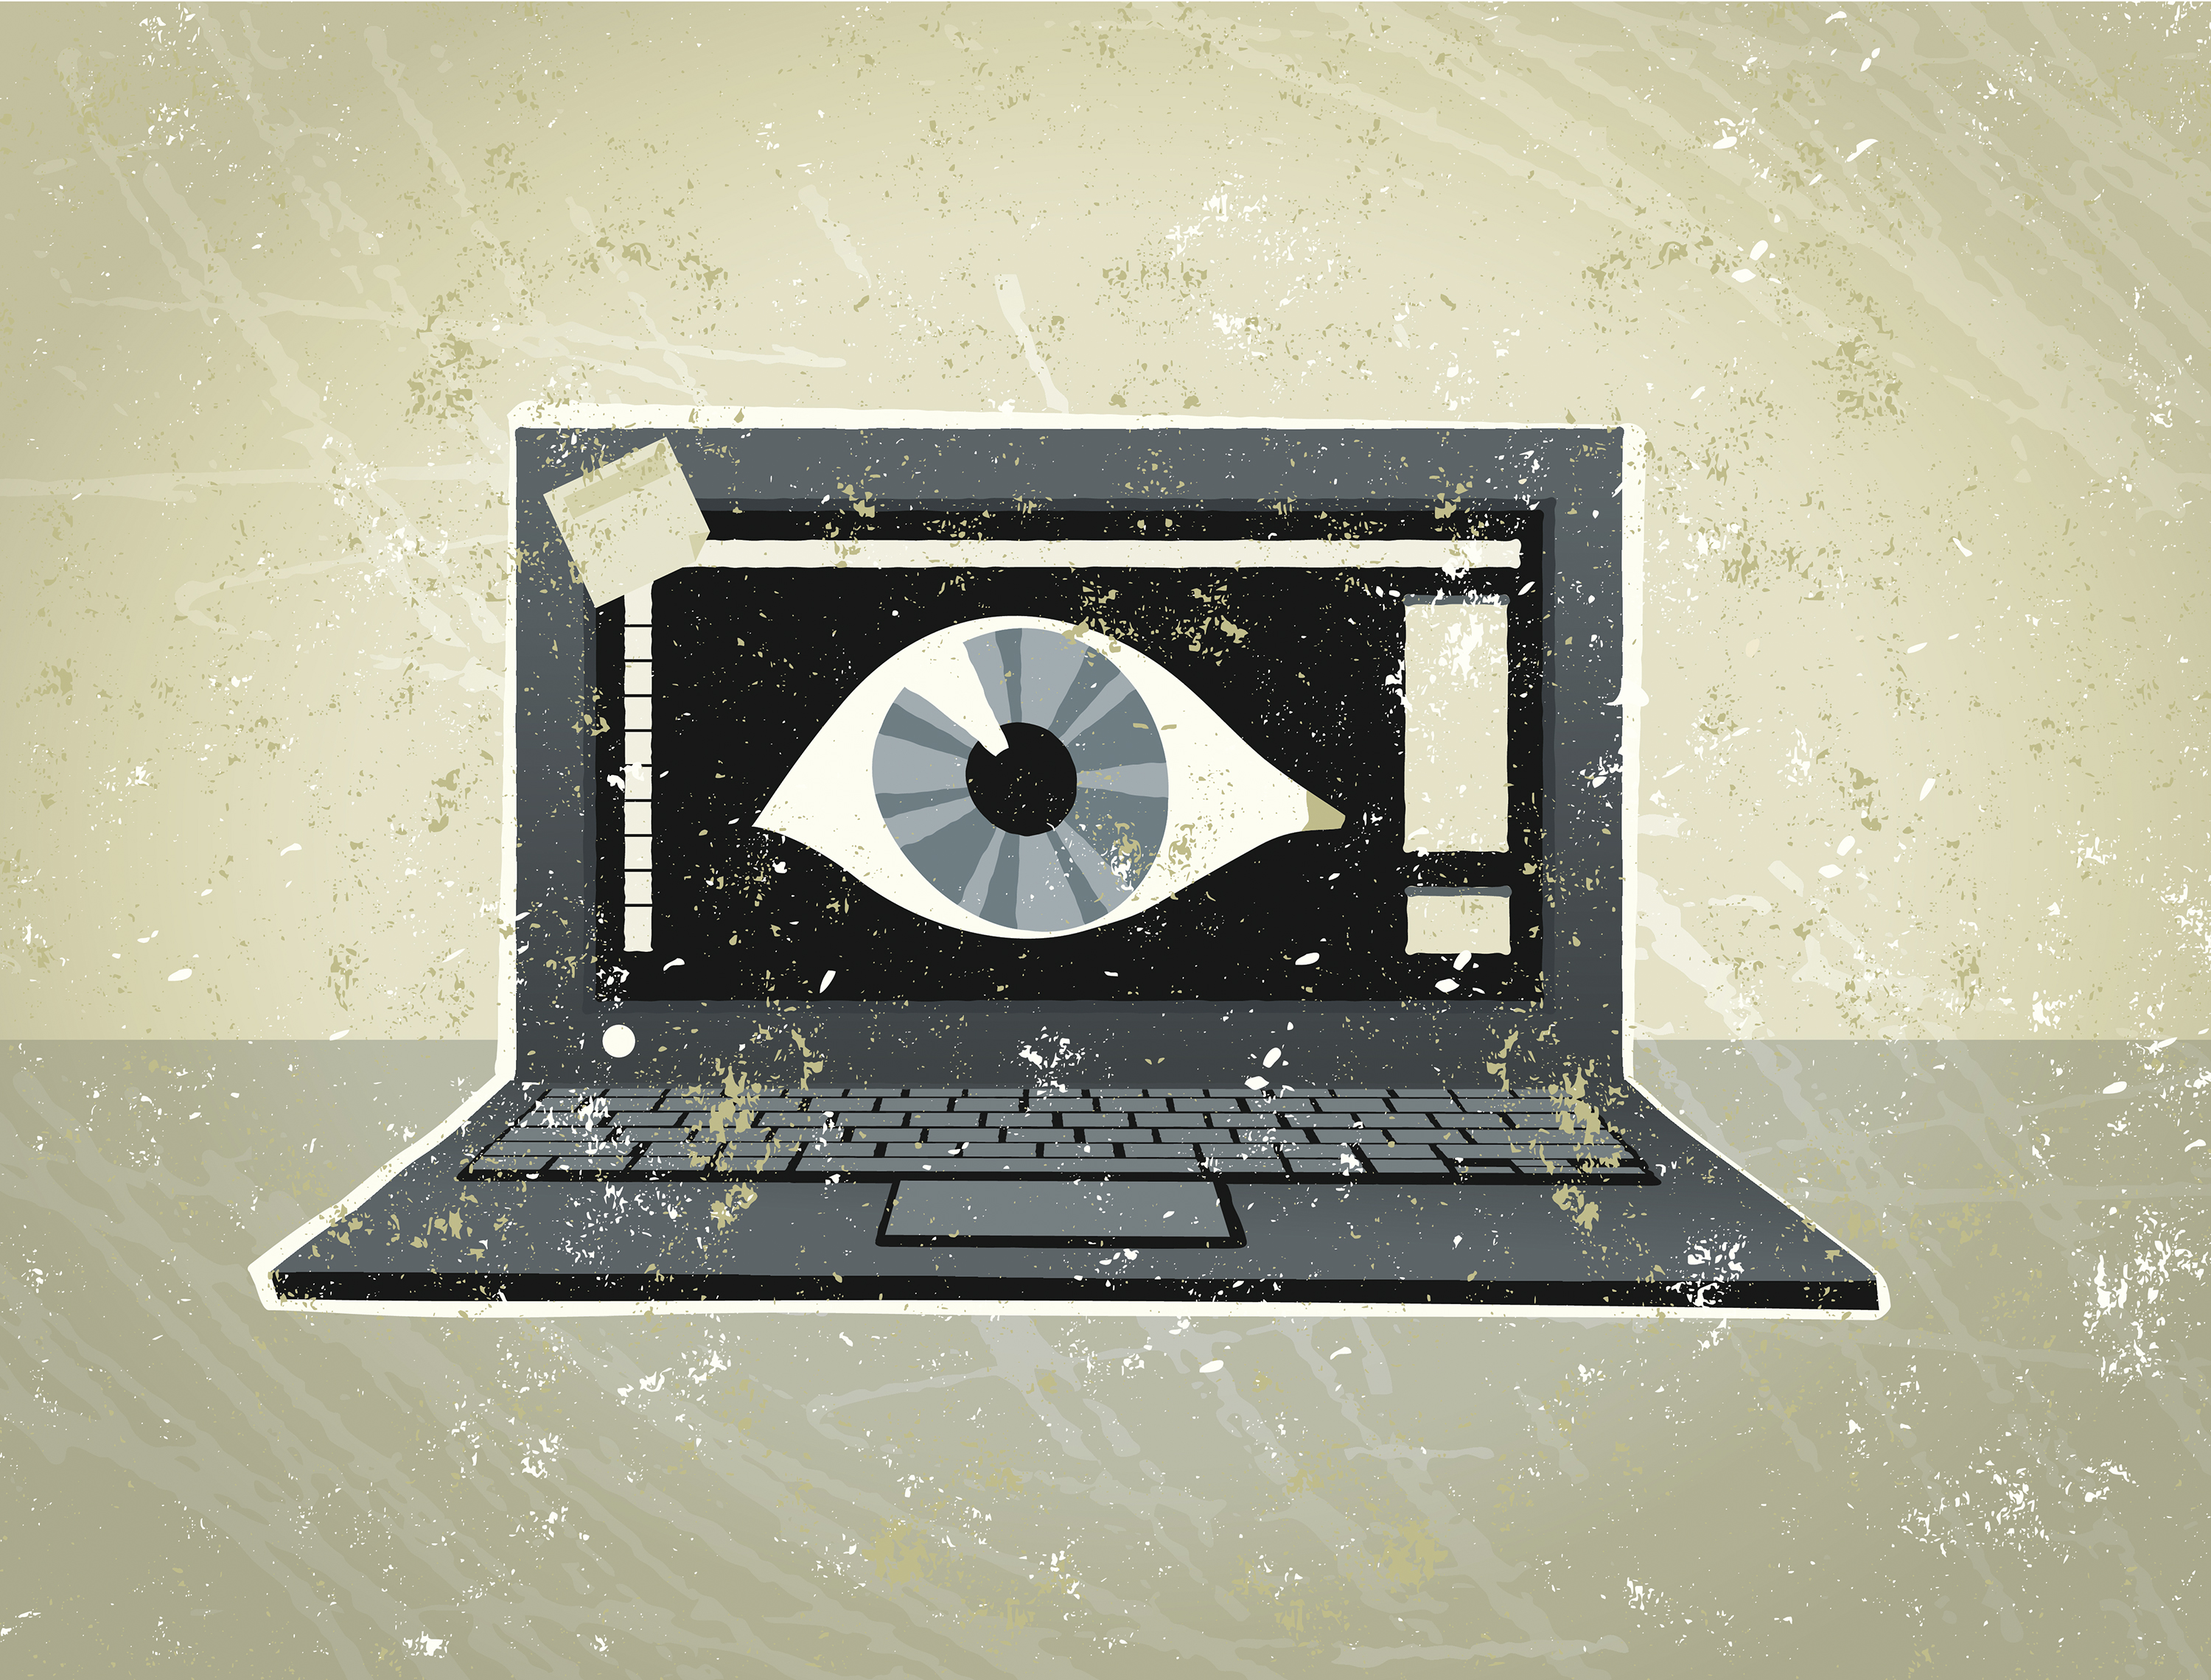 A drawing of a laptop computer with an eyeball on its screen.